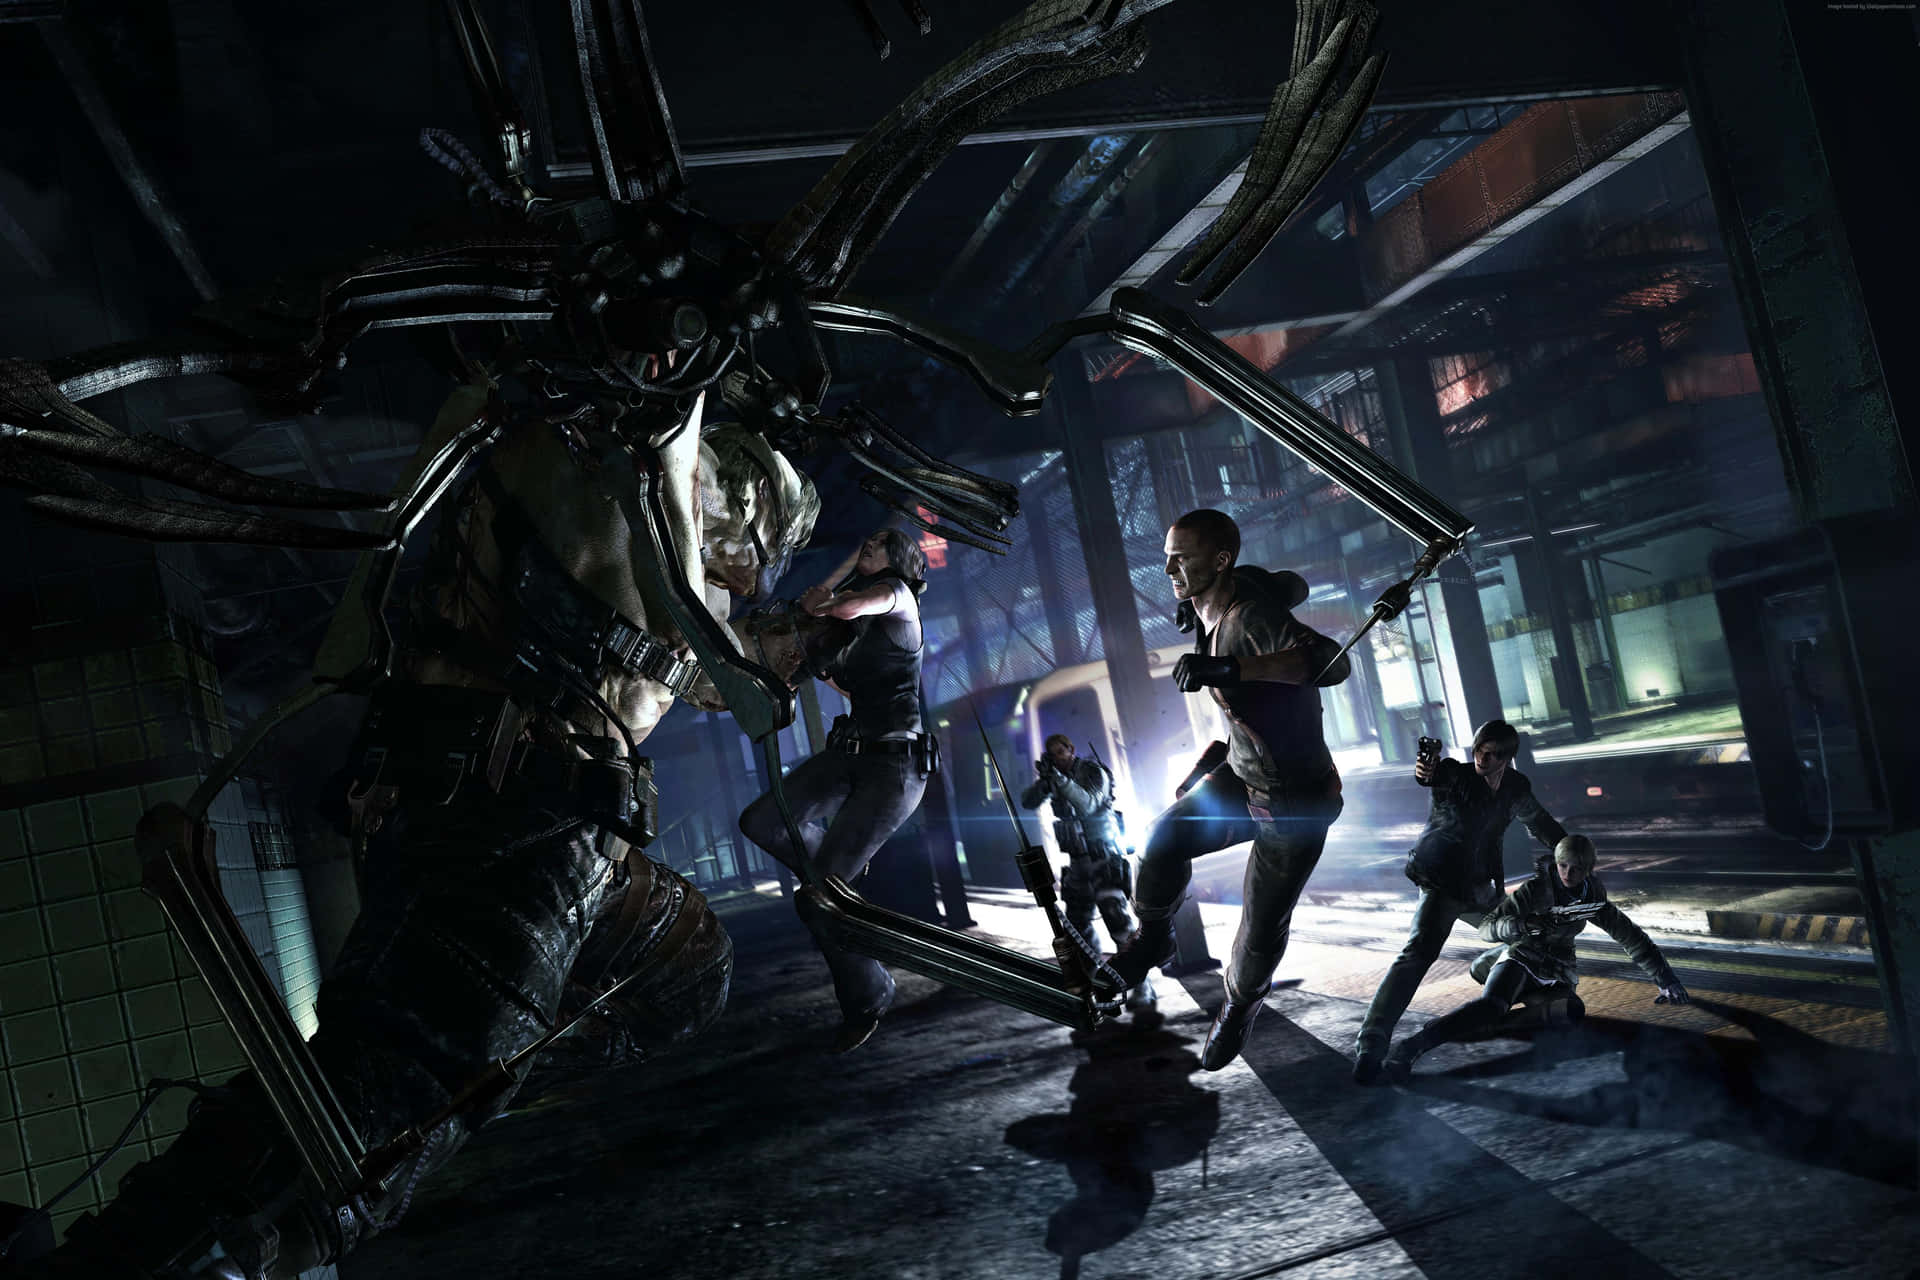 A Group Of People In A Dark Area With A Giant Spider Wallpaper